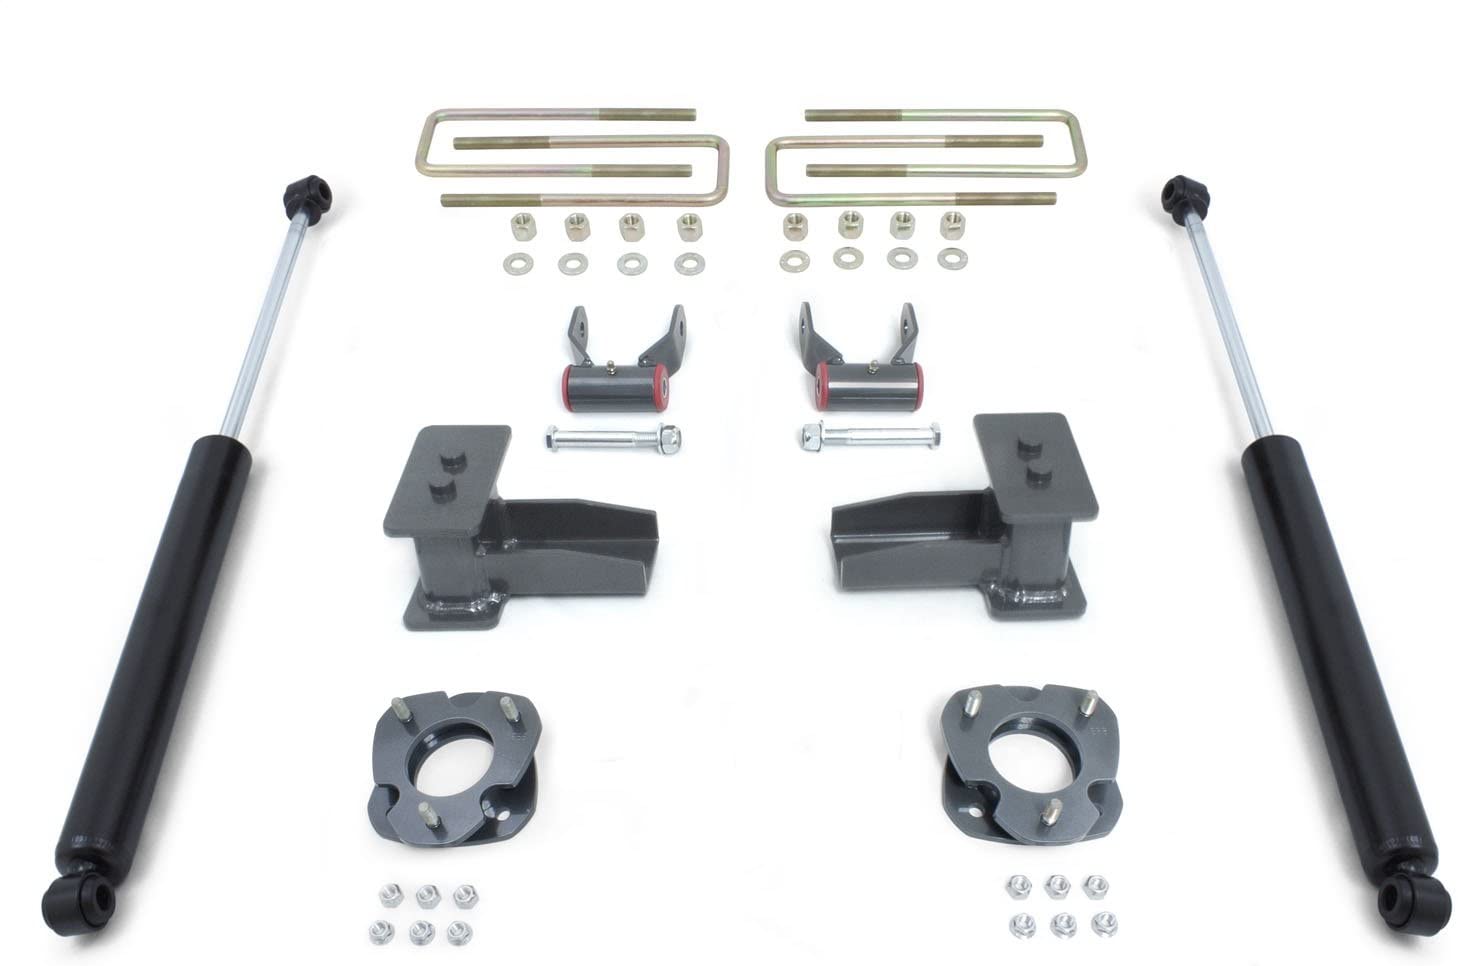 Maxtrac Suspension 903151 Body Lift Kit and Component (2.5In Strut Spacers, 5In Blocks/U-Bolt, 1In Shackle, Maxtrac Shocks 3200Ll-4)